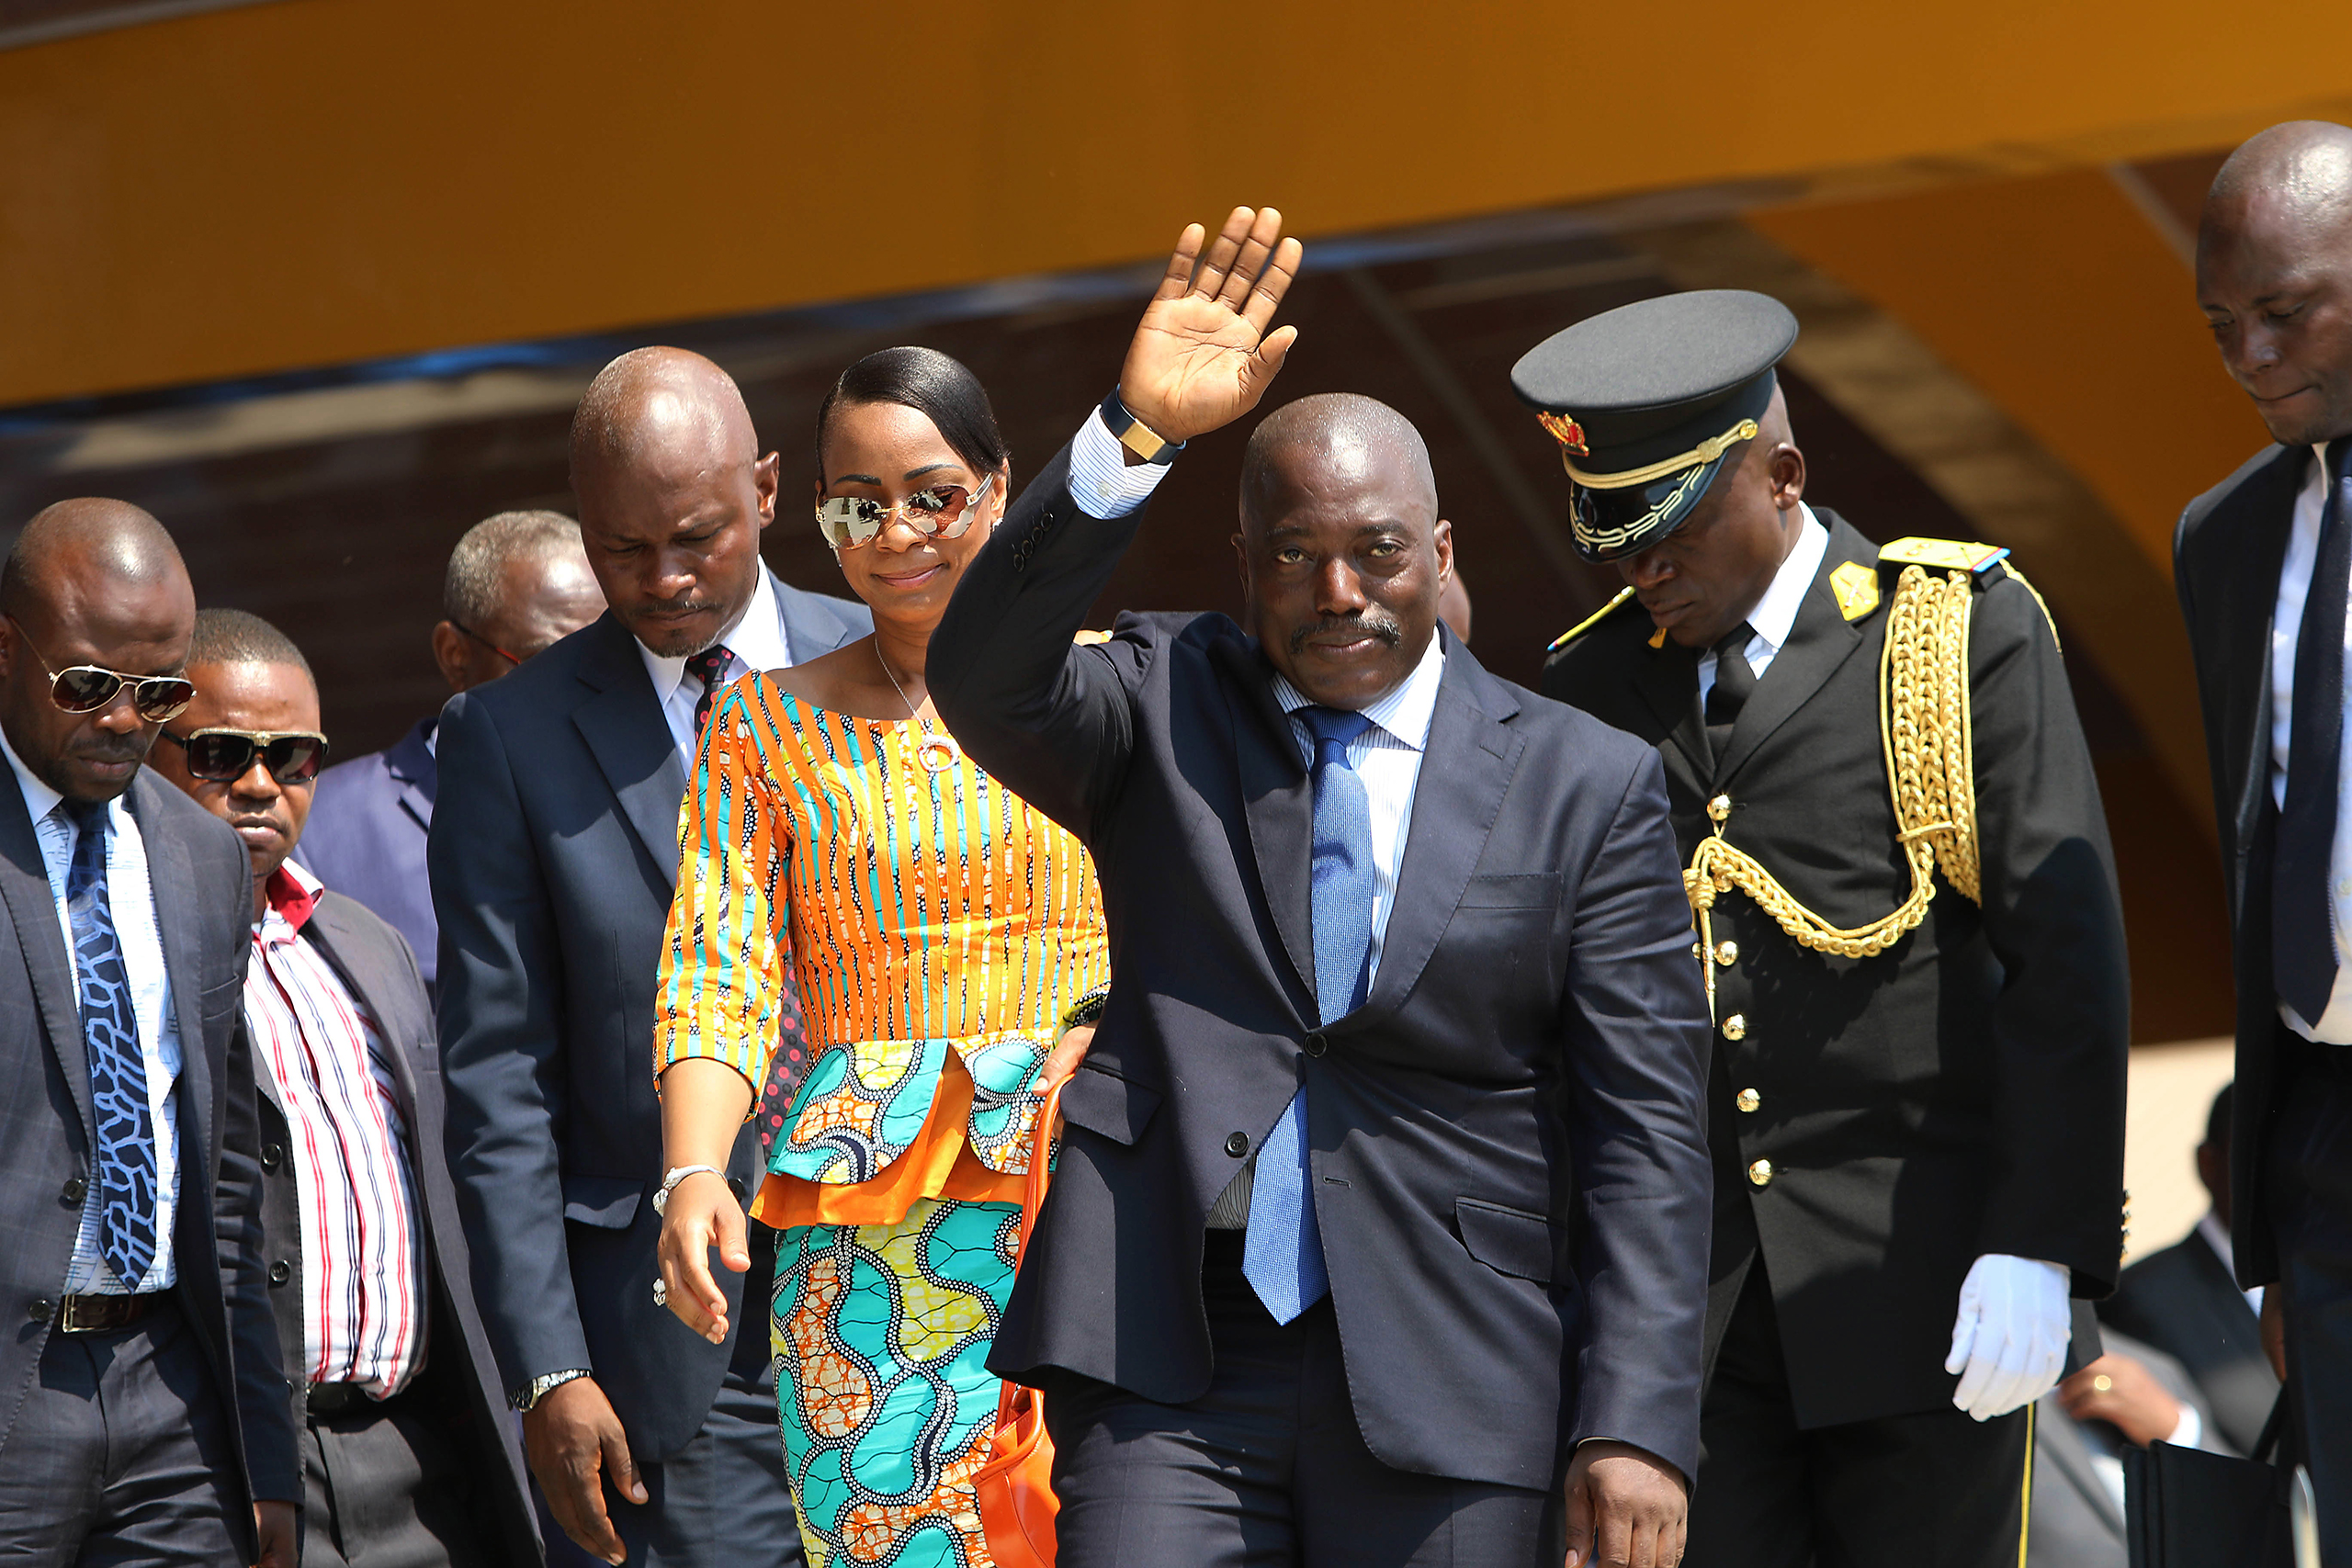 Congolese President Joseph Kabila waves as he and others celebrate the Democratic Republic of Congo, DRC, independence in Kindu, Congo on June 30, 2016. (John Bompengo—AP)